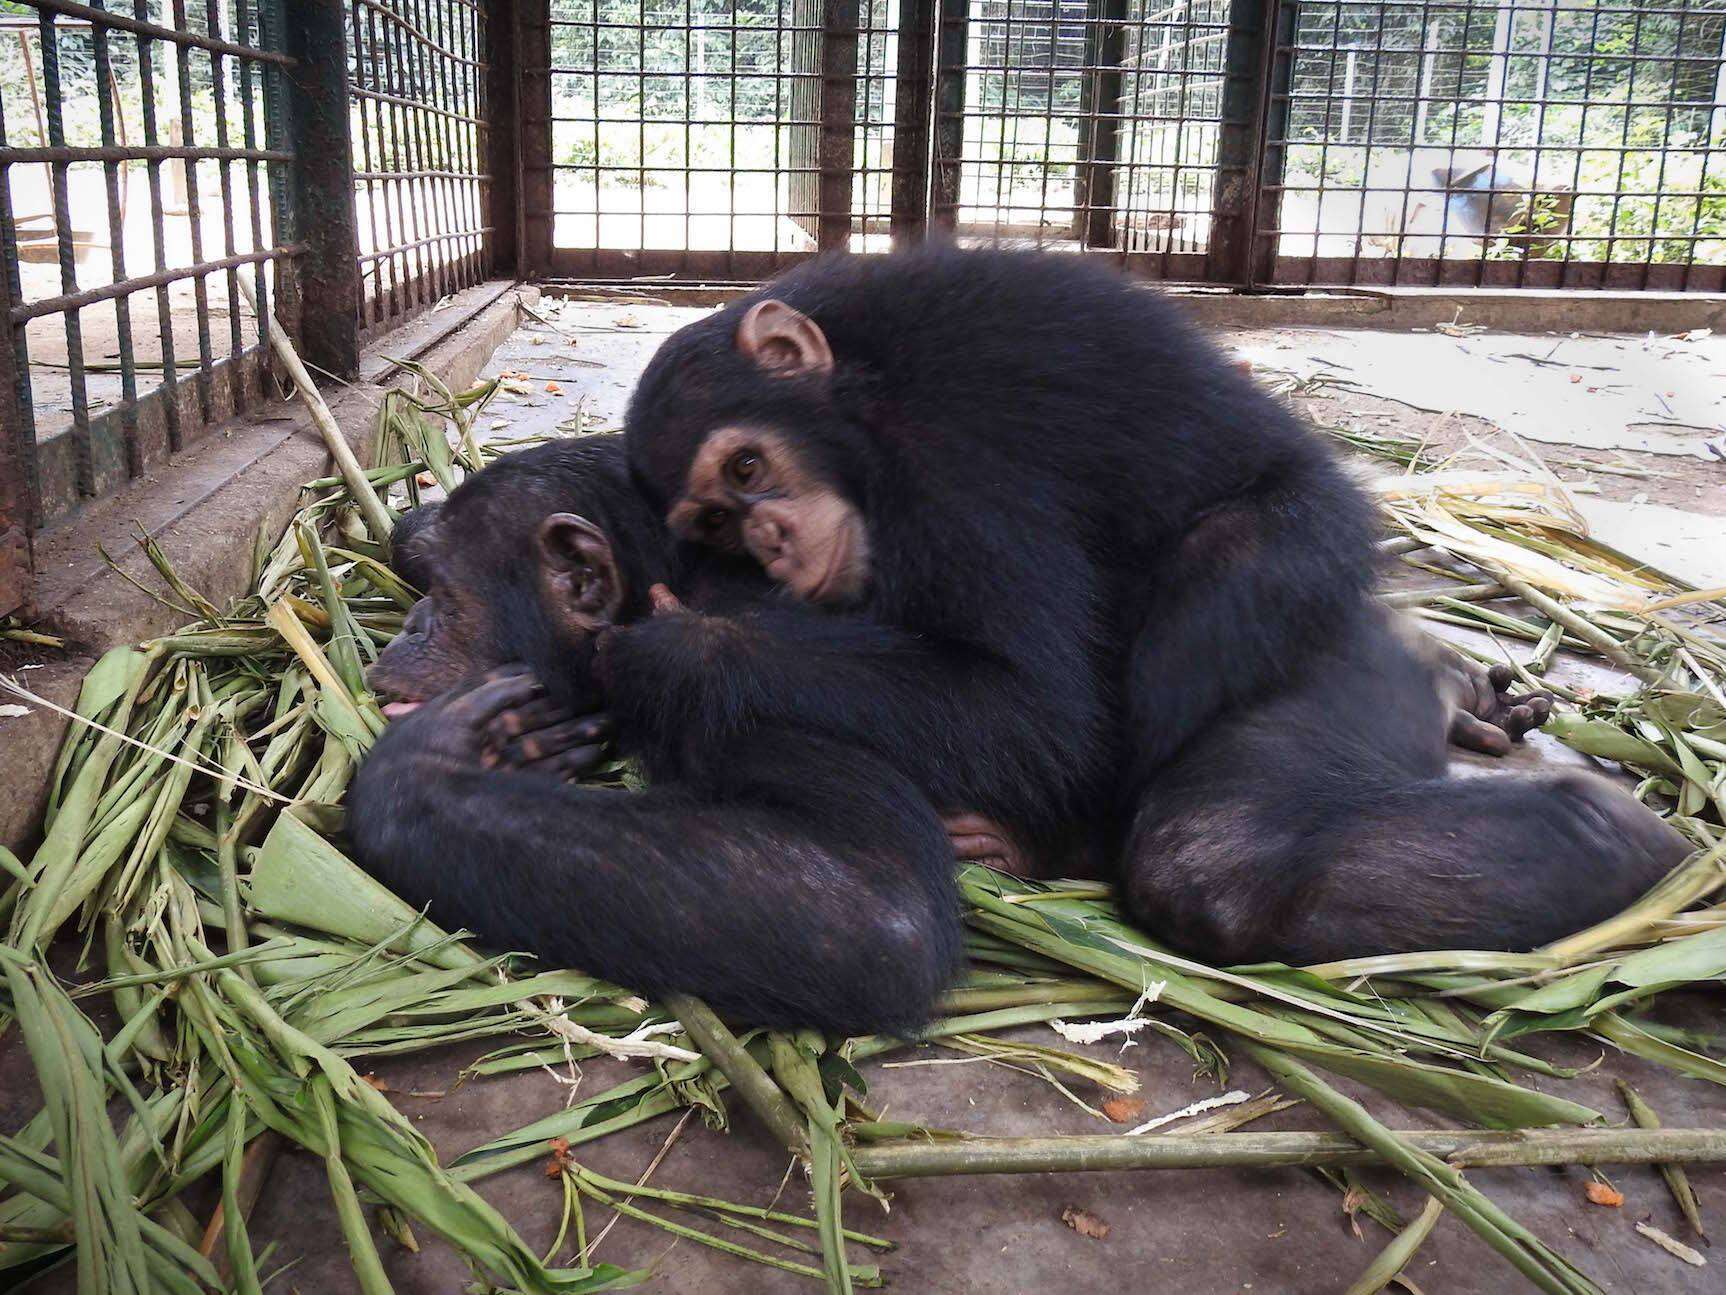 Rescued chimps snuggling in Cameroon